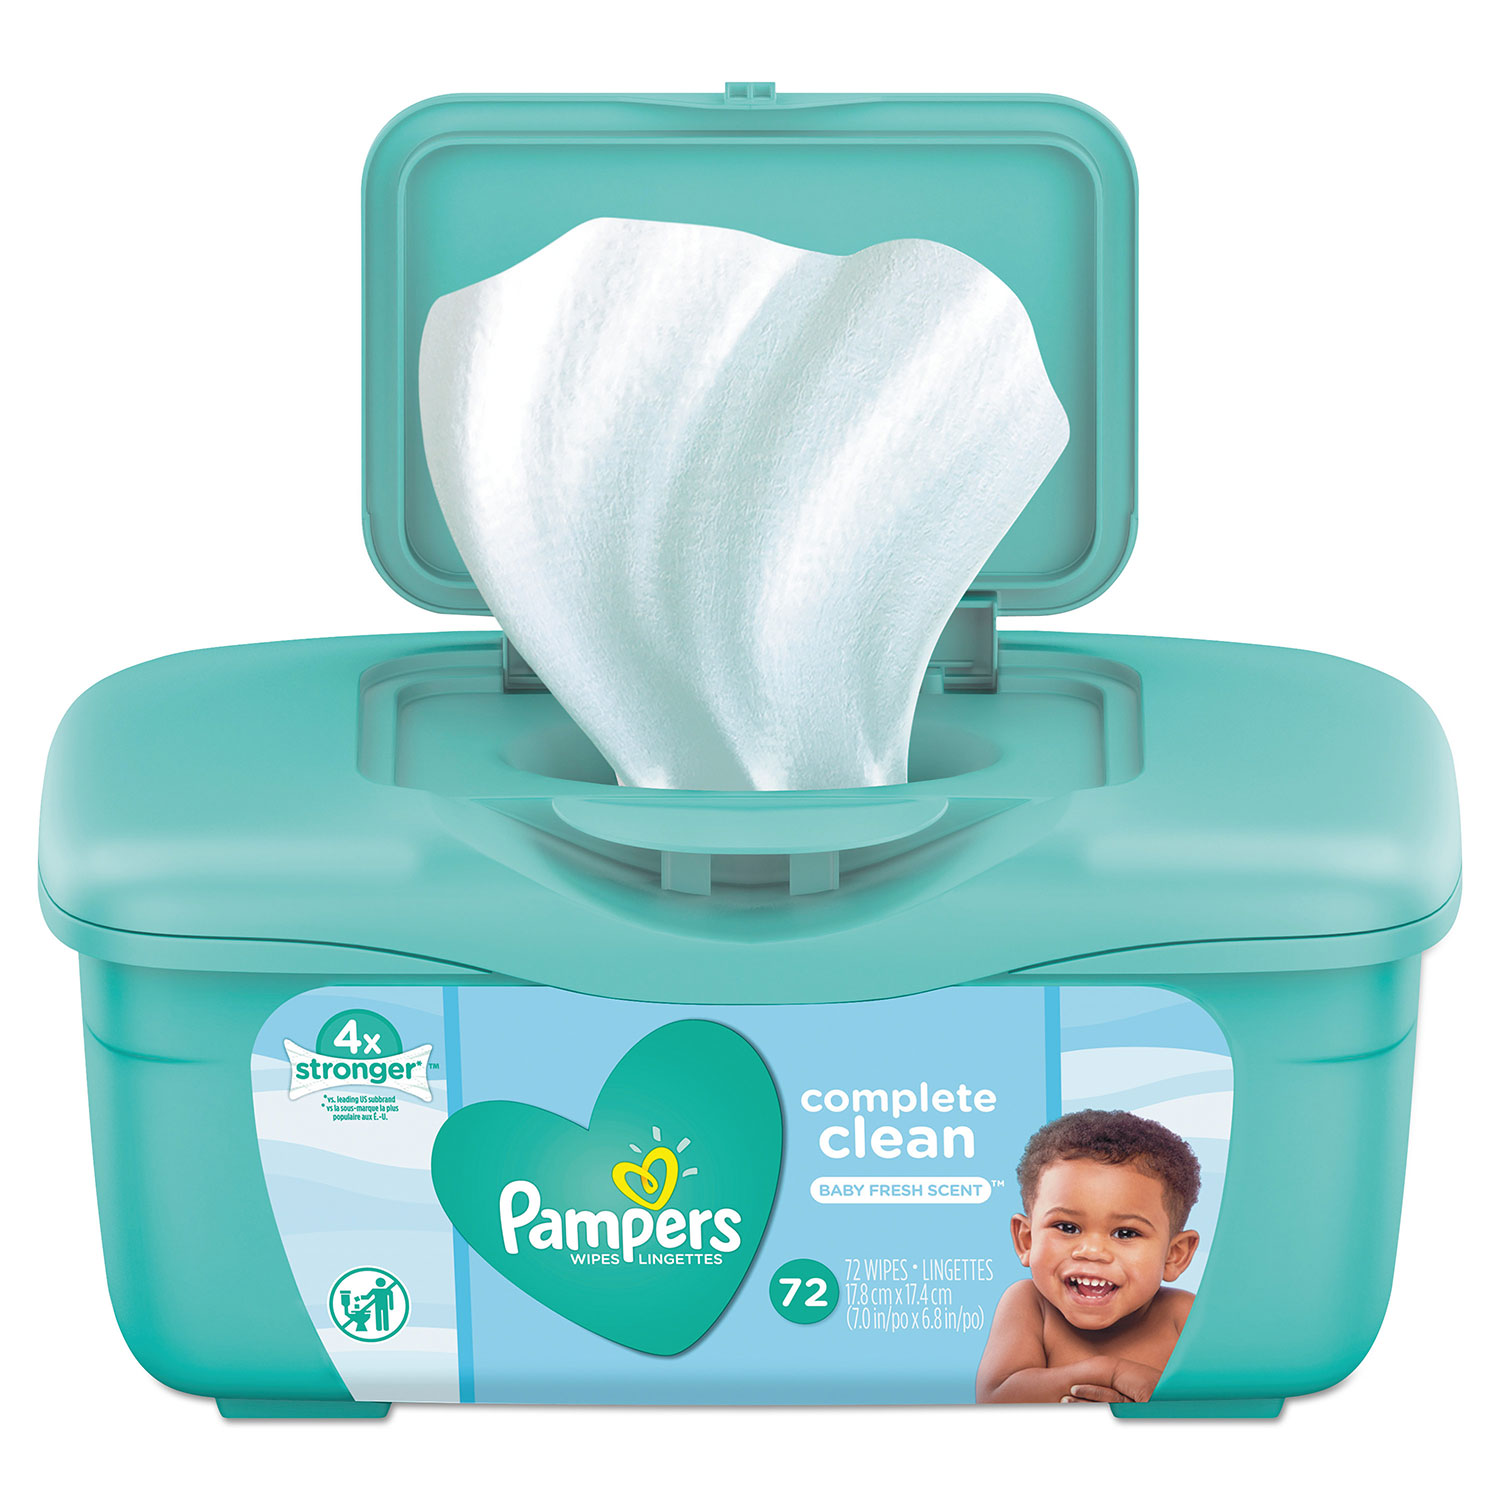 procter-gamble-pampers-complete-clean-wipes-baby-fresh-scent-tub